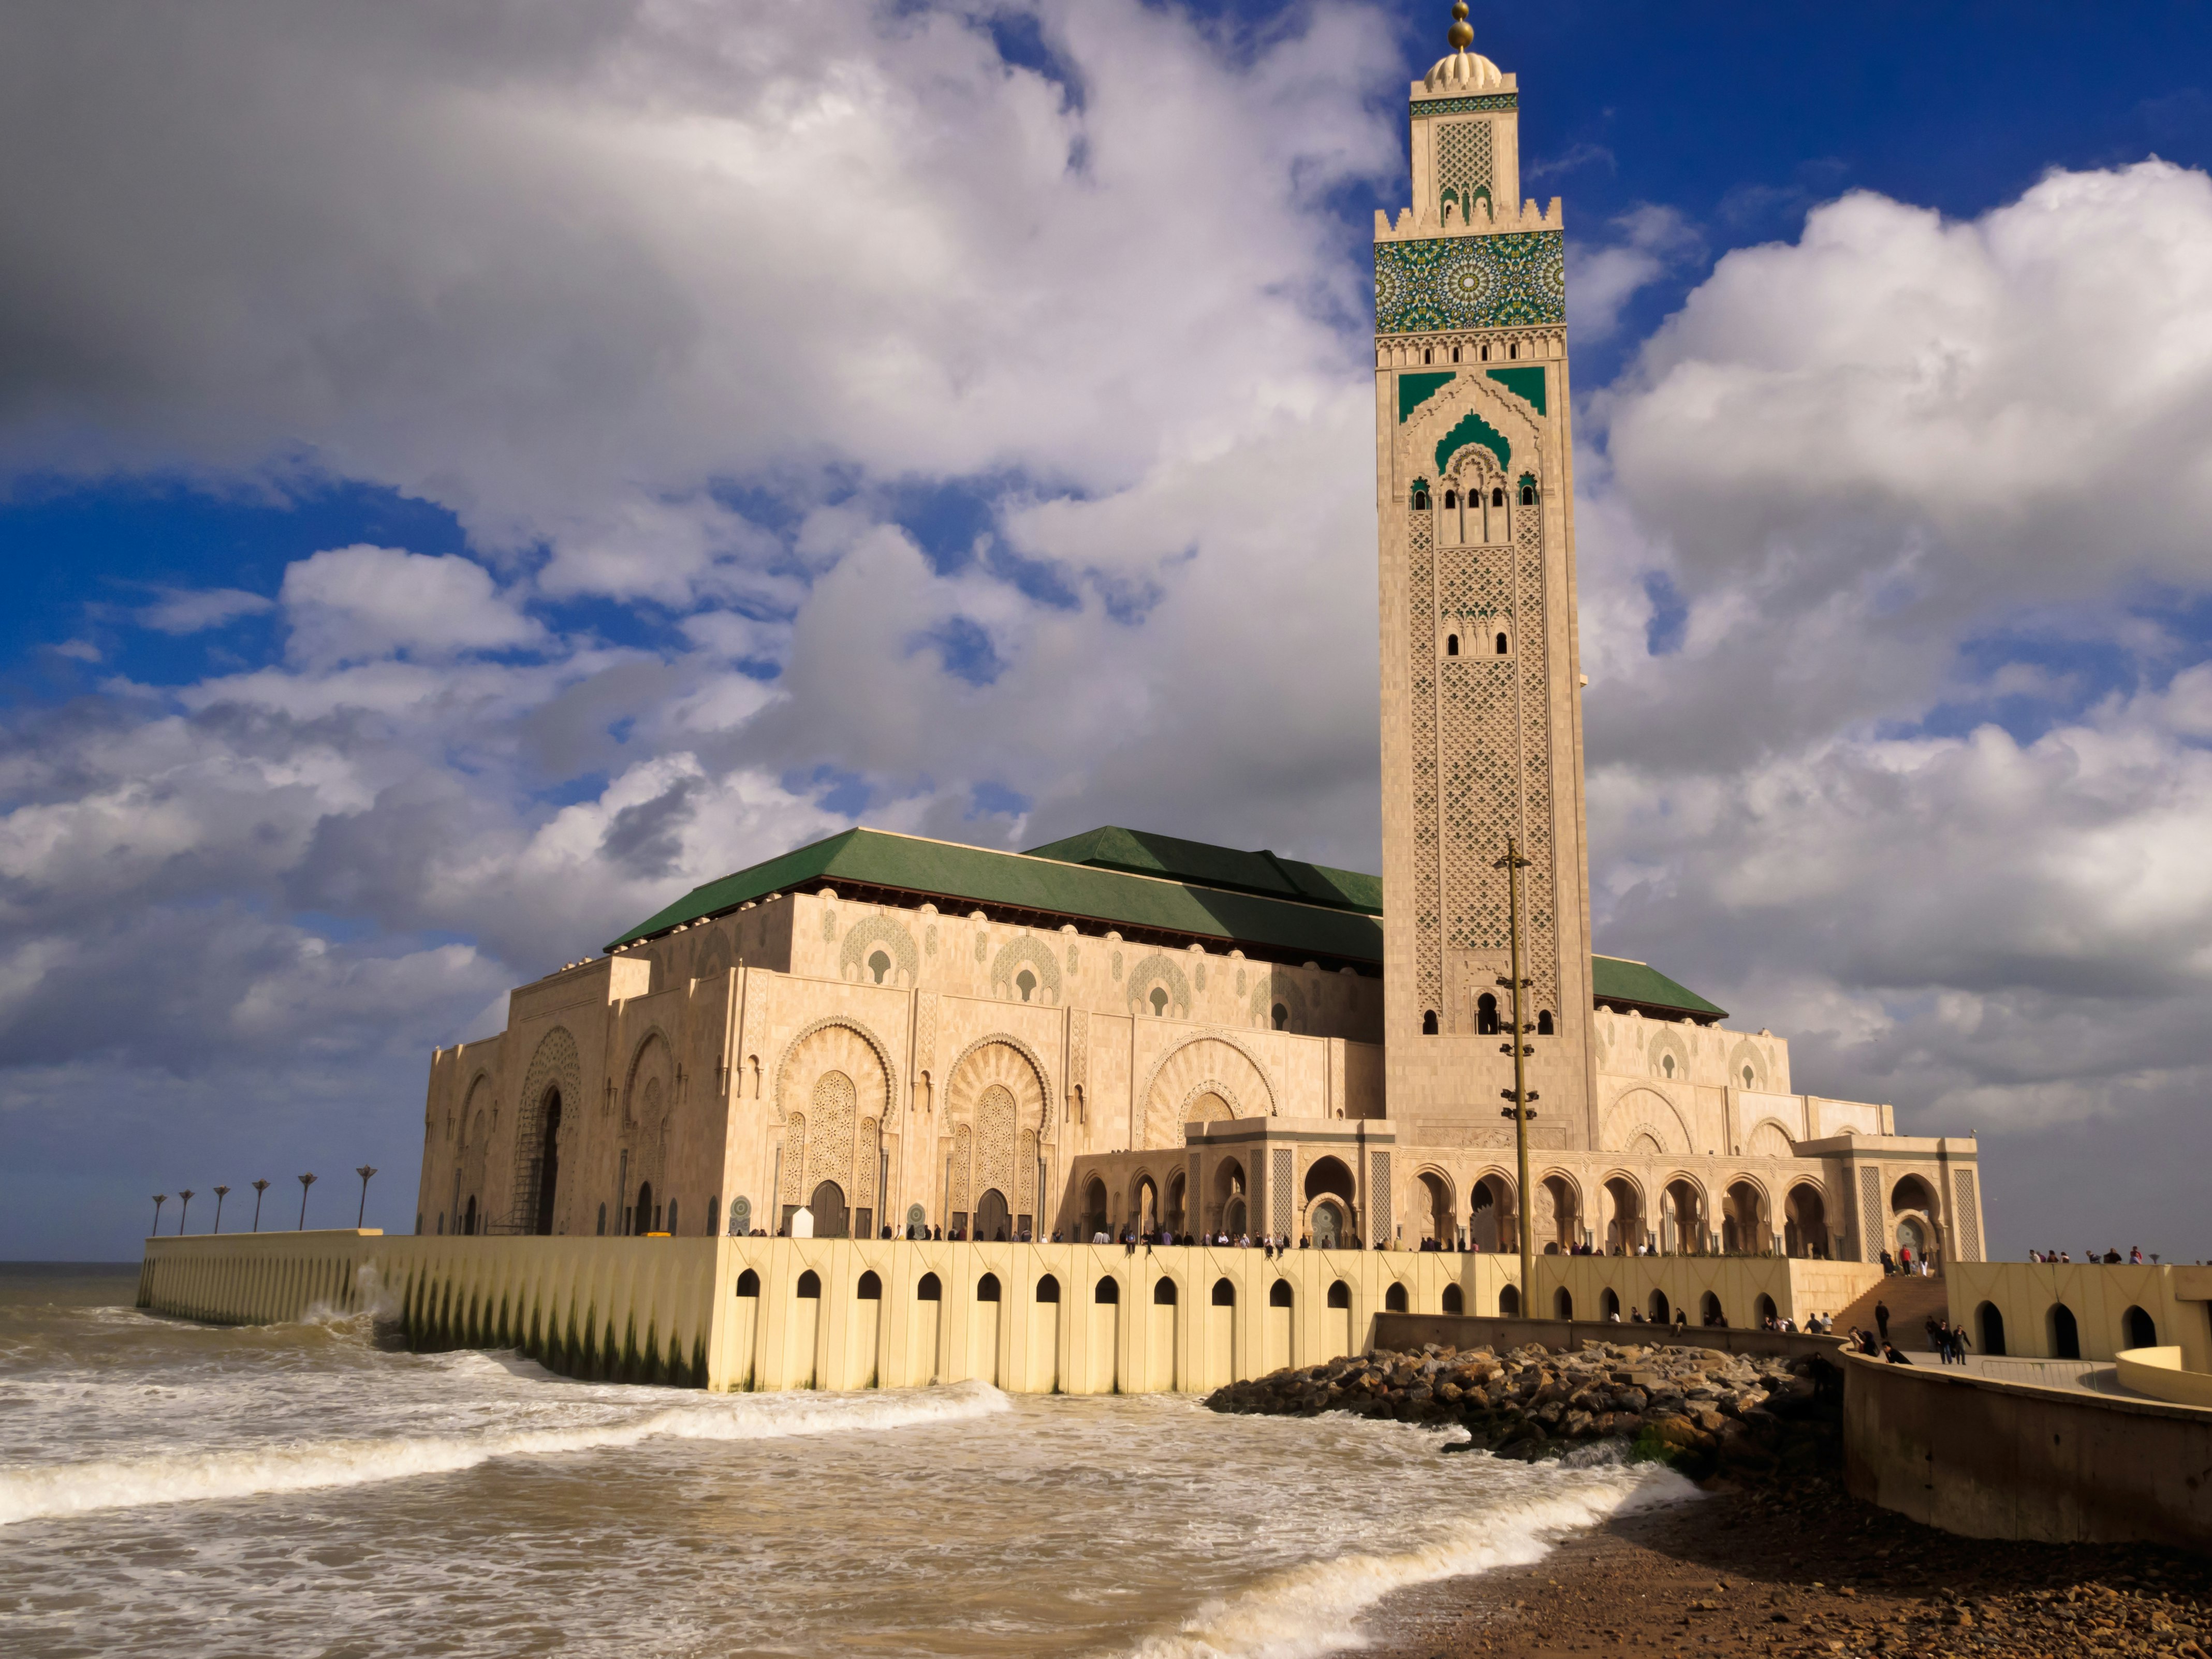 Waves crash against the outer walls of the Hassan II Mosque and Minaret in Casablanca, Morocco